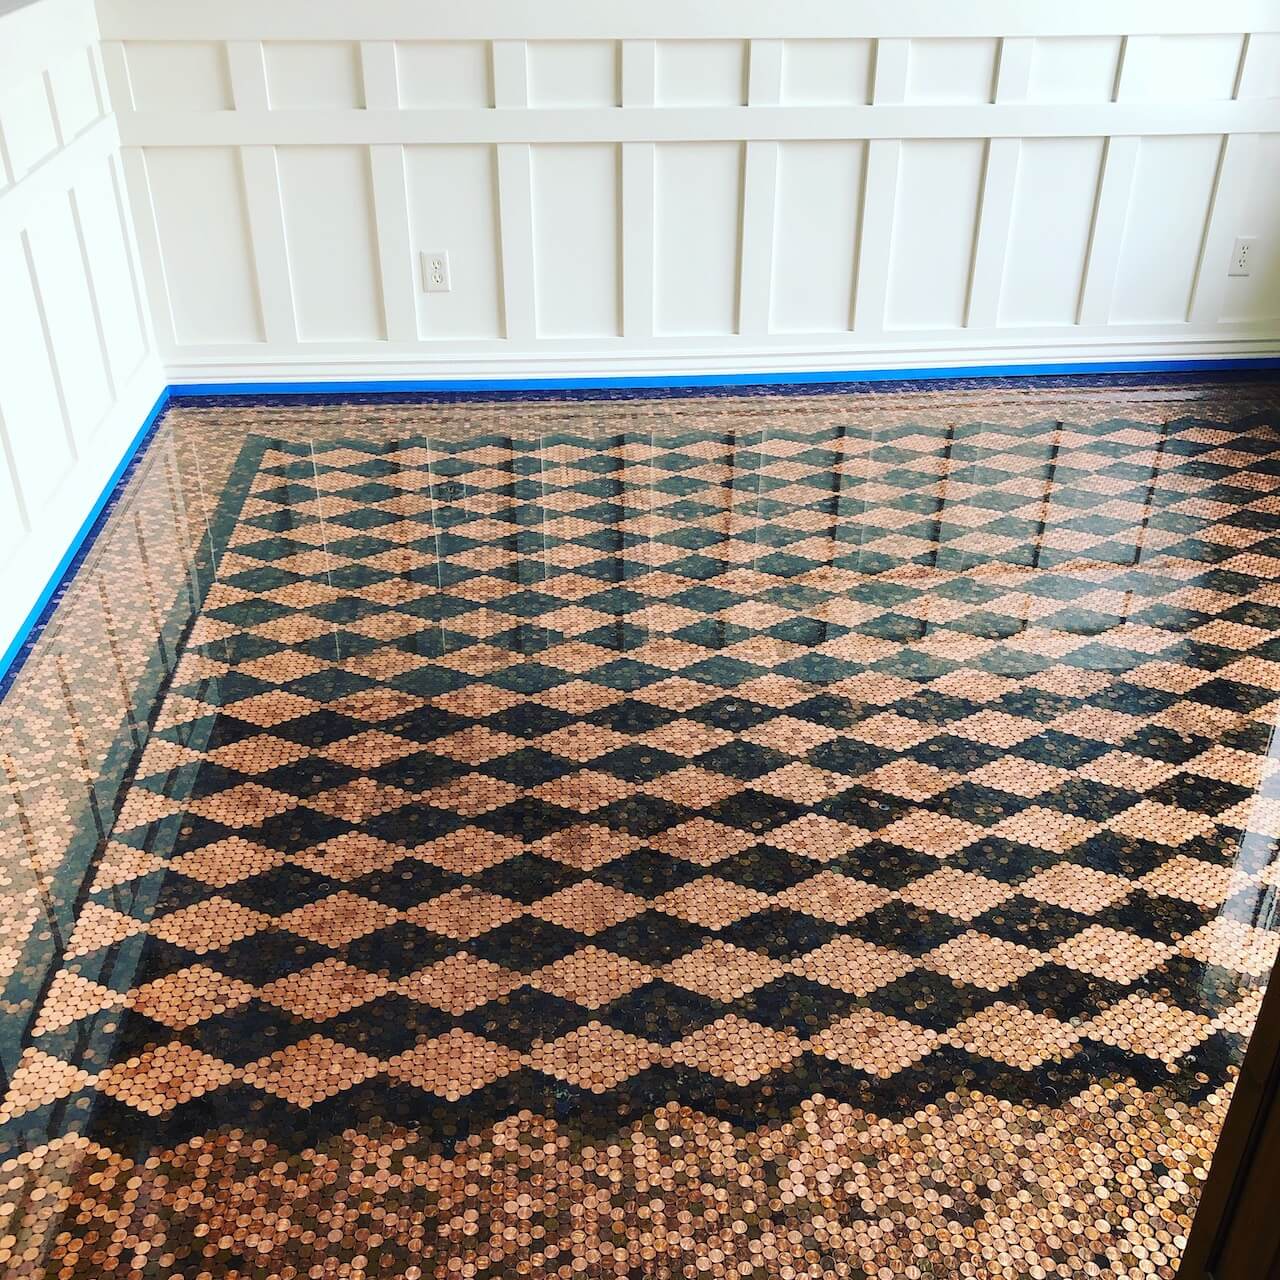 Beautiful checkerboard pattern created with light and dark pennies and then flooded with Leggari's clear epoxy.